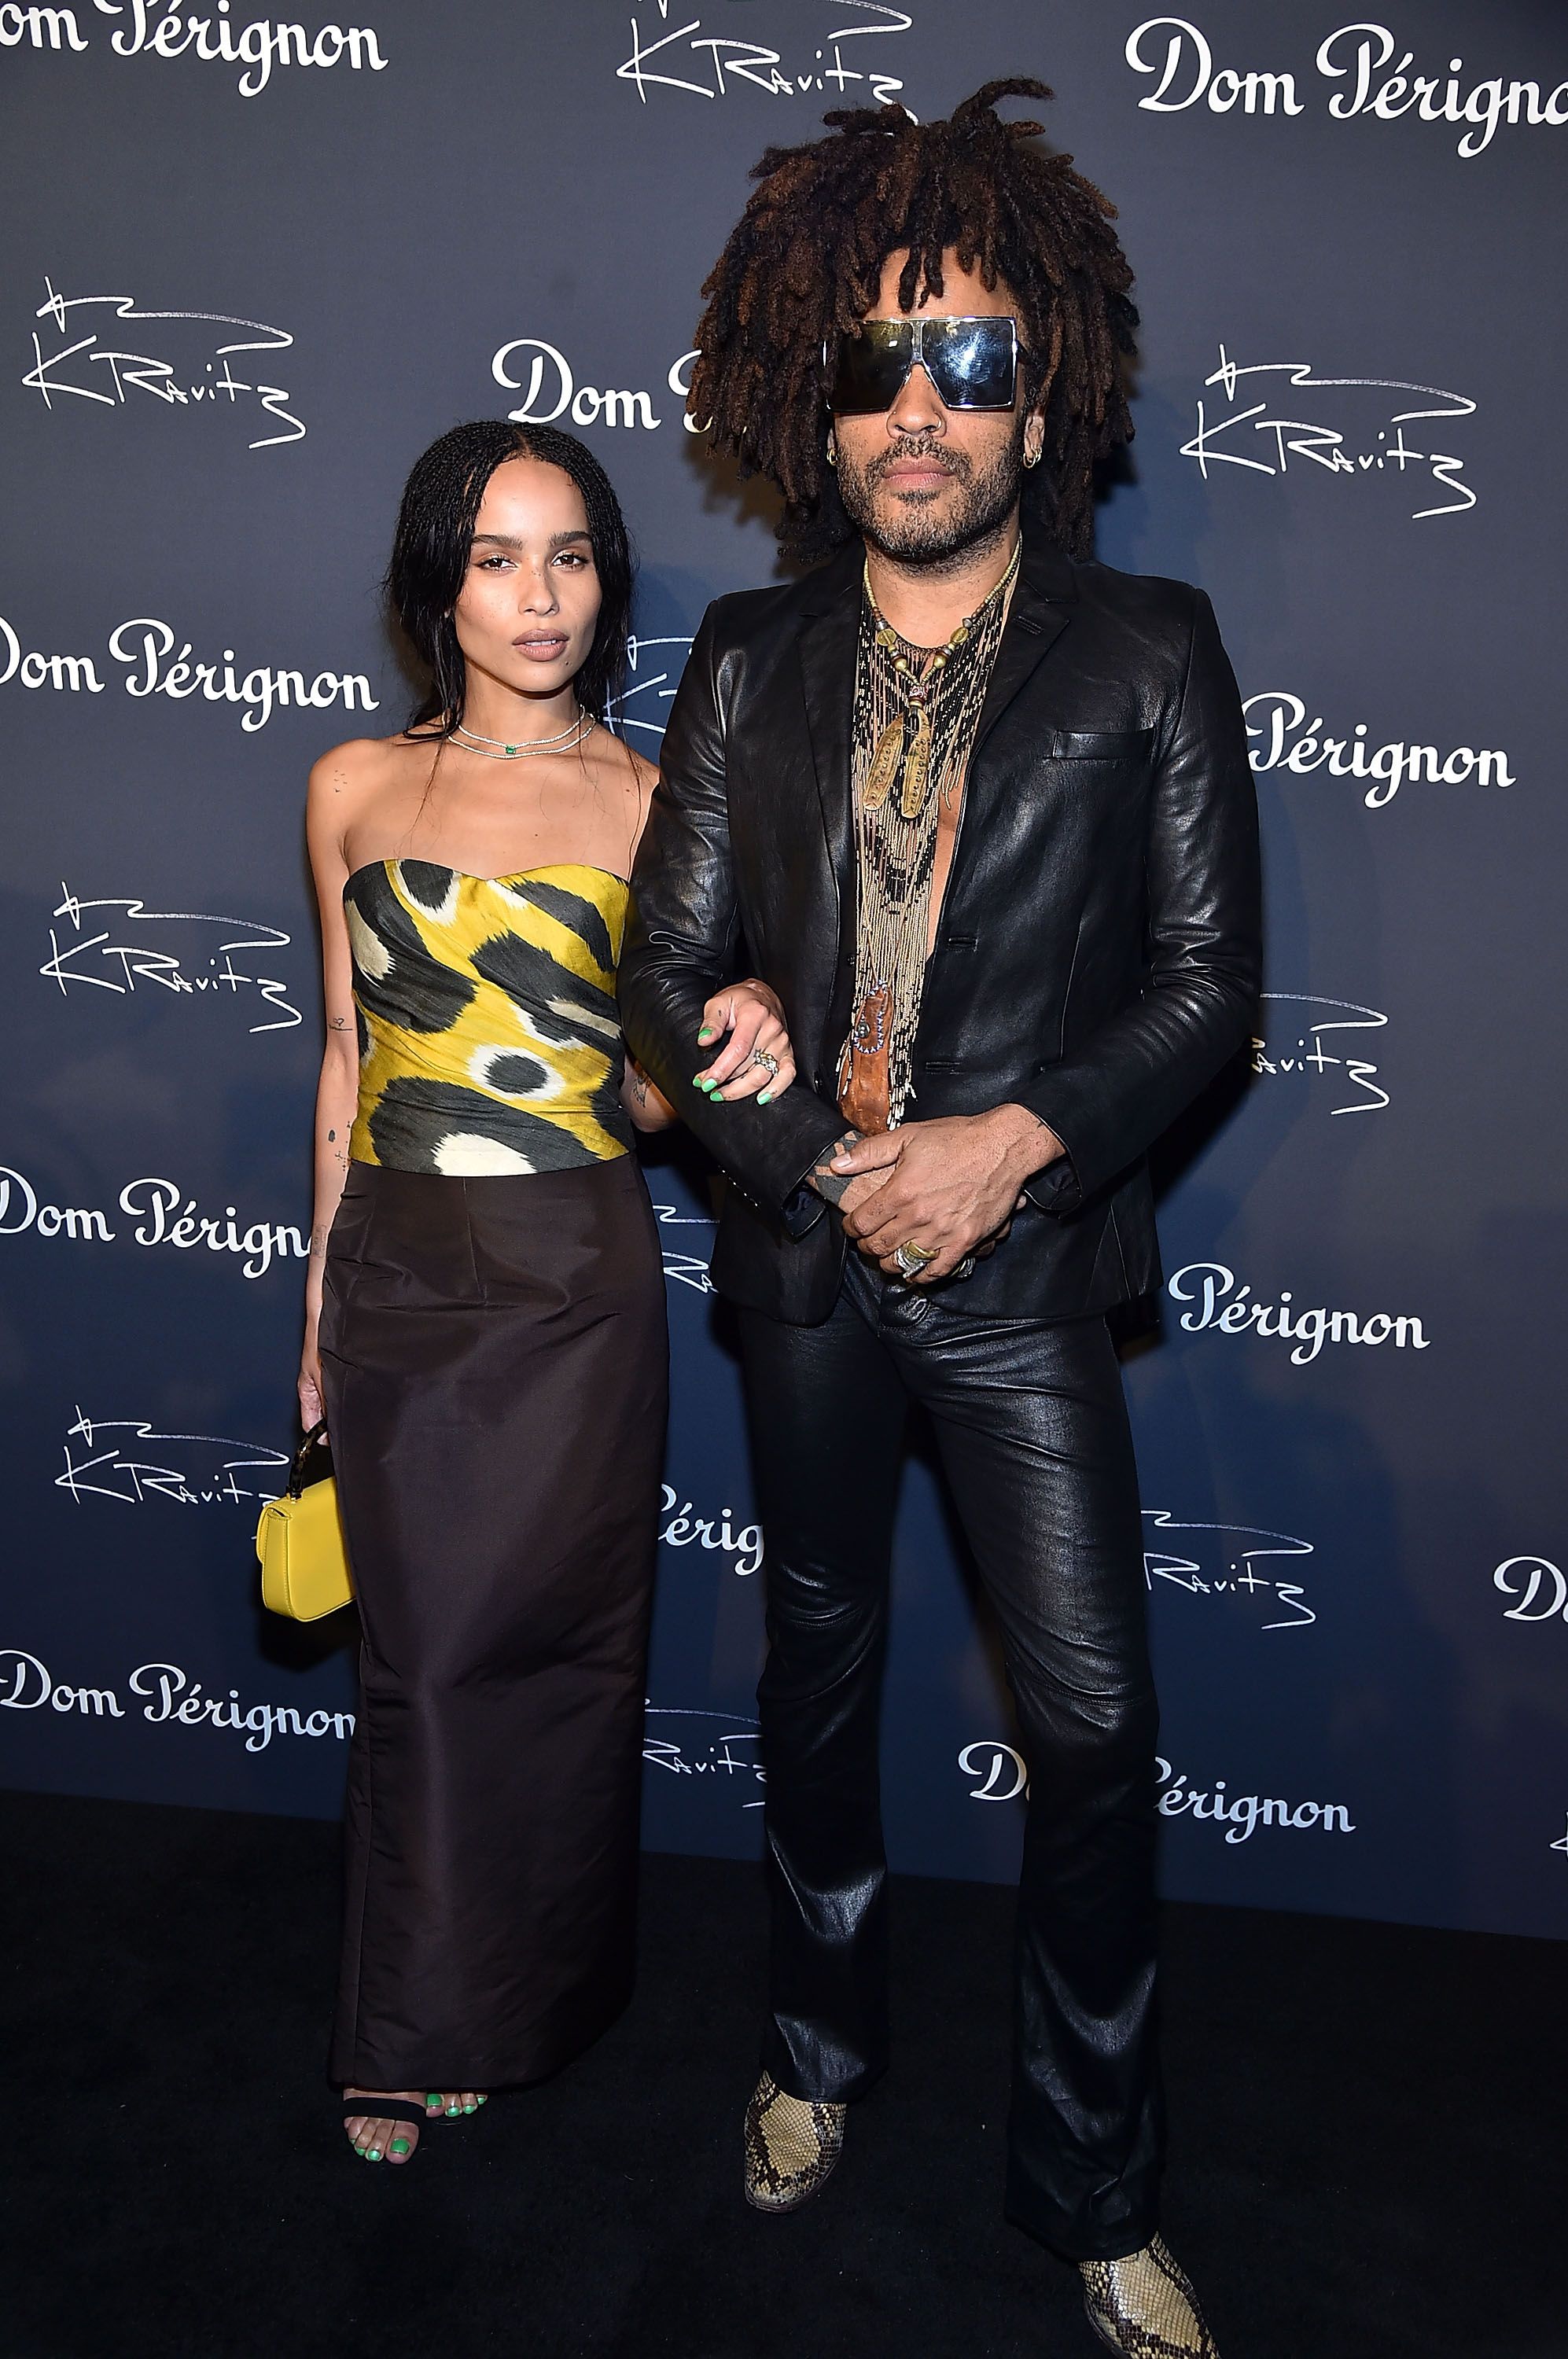 Zoe and Lenny Kravitz at the Dom Perignon & Lenny Kravitz: 'Assemblage' Exhibition on September 28, 2018 in New York. | Photo: Getty Images